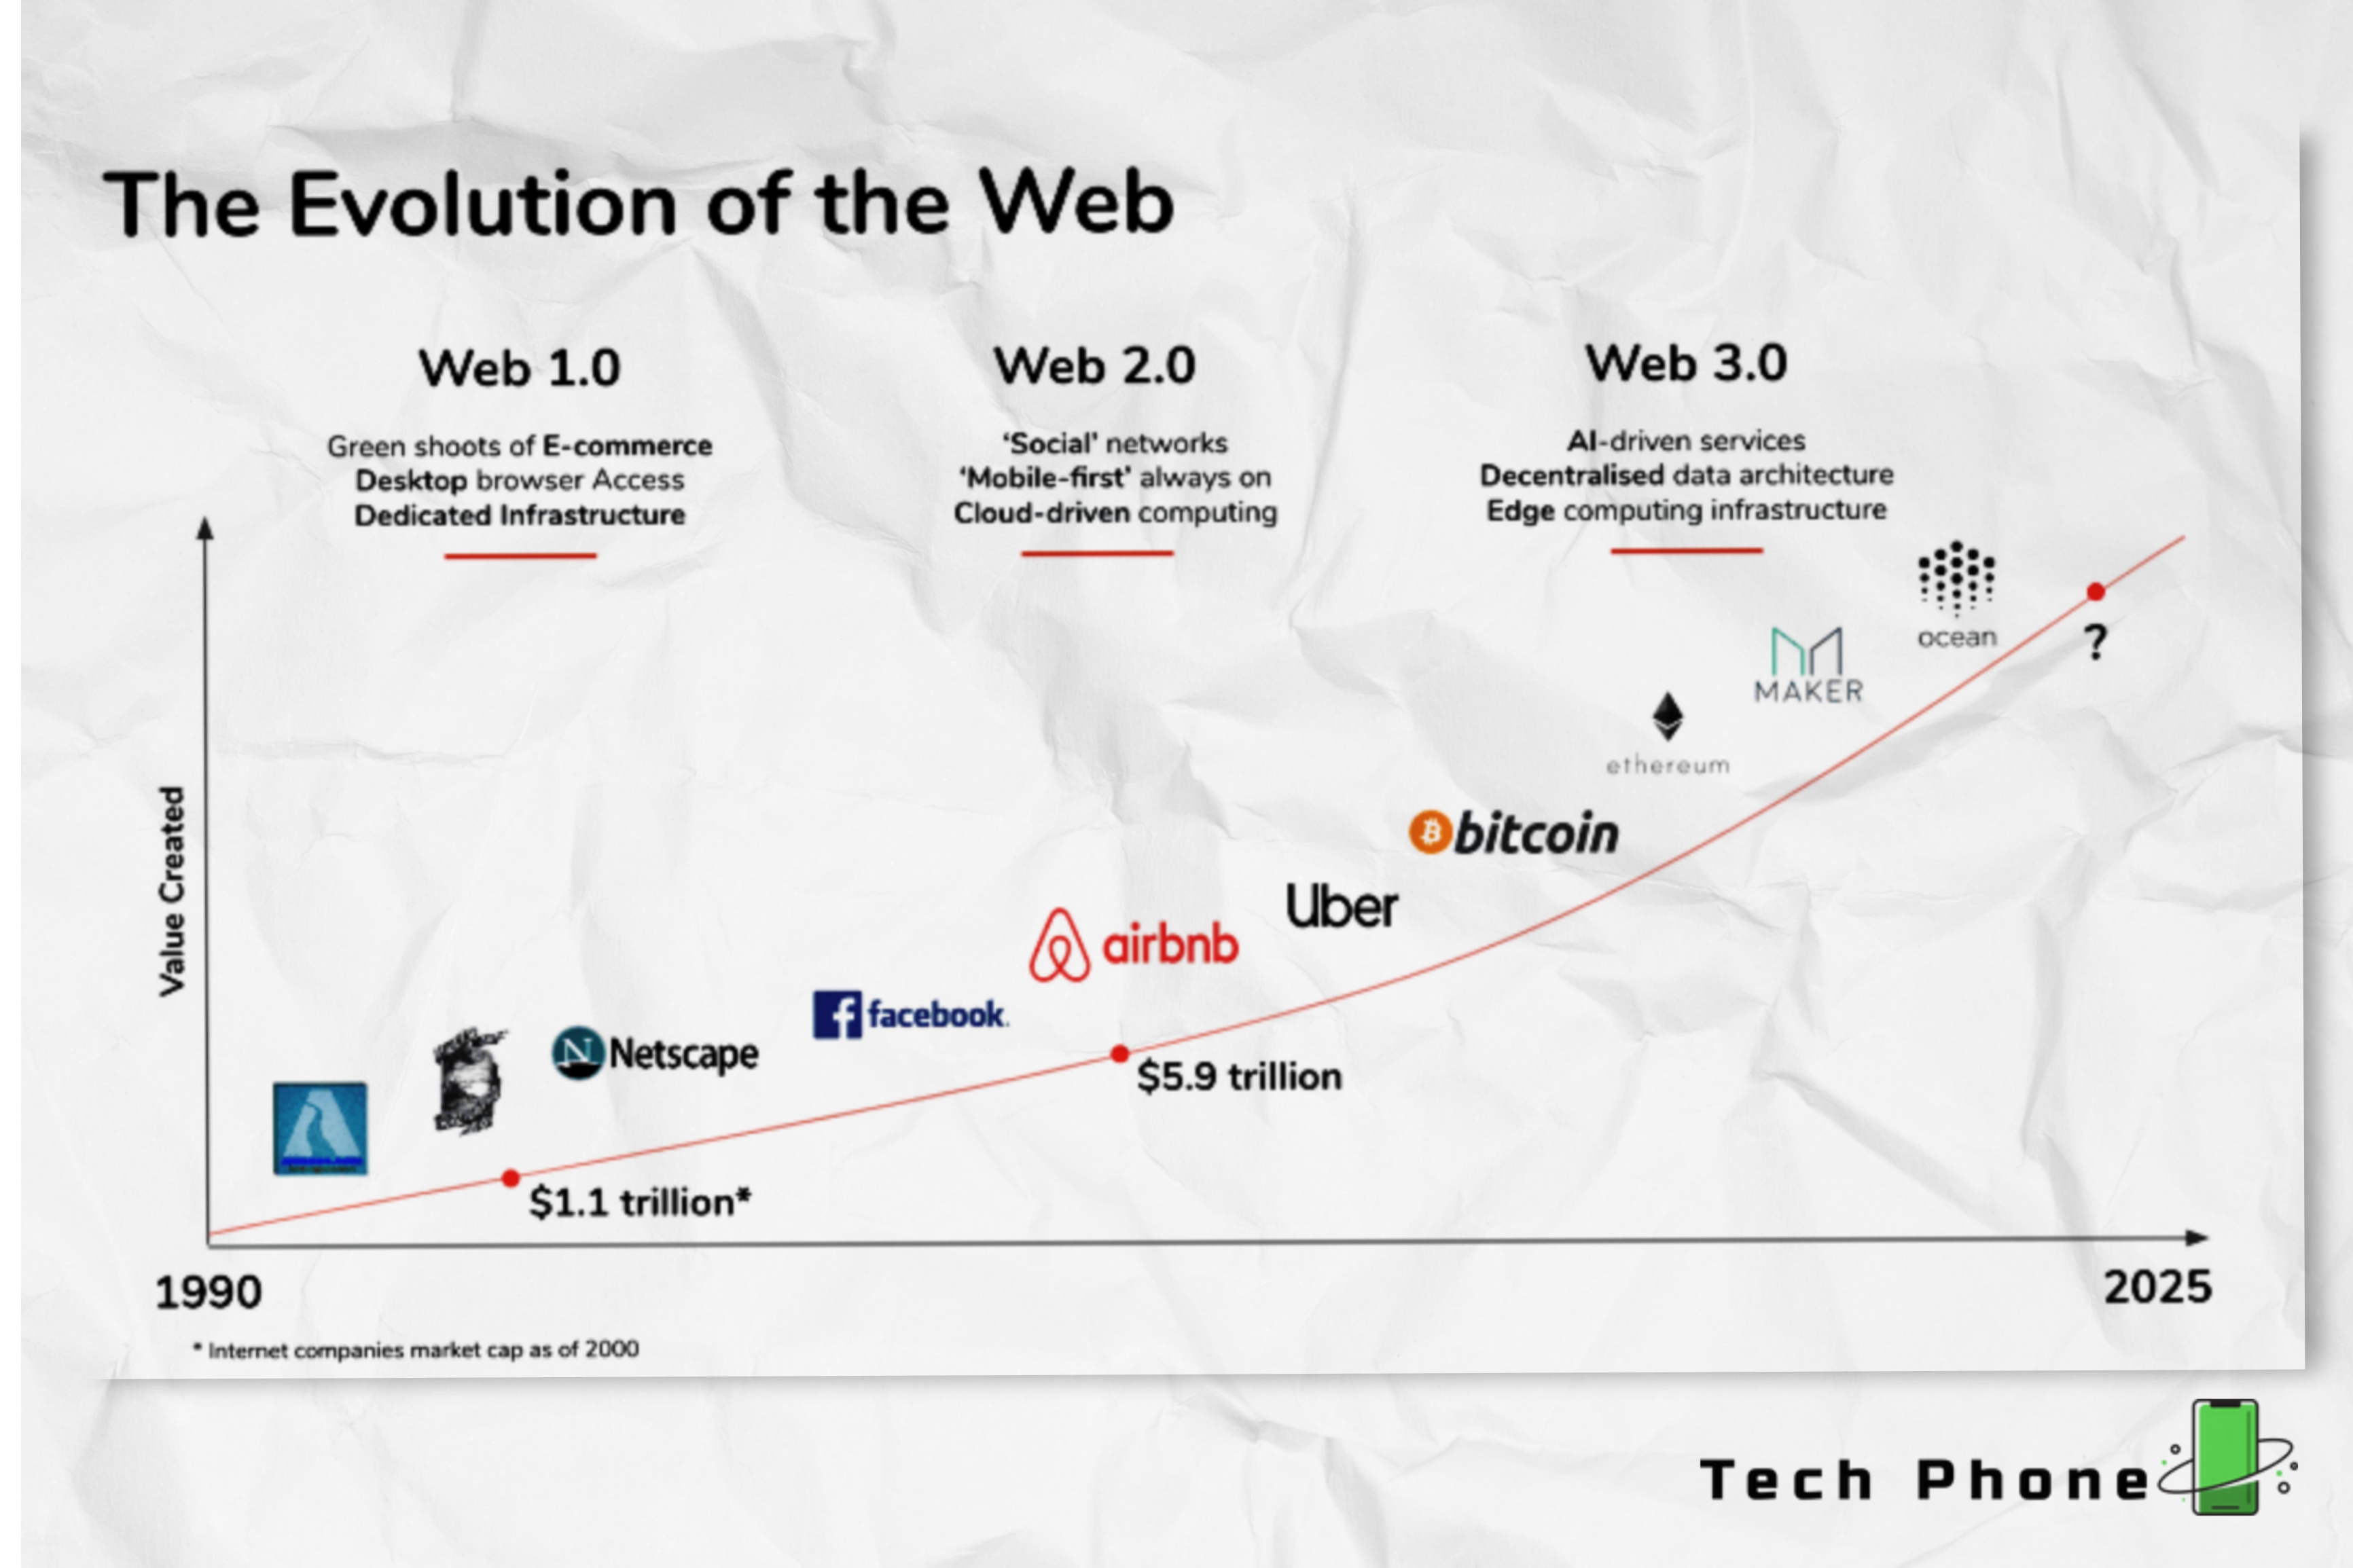 The evaluation of the web